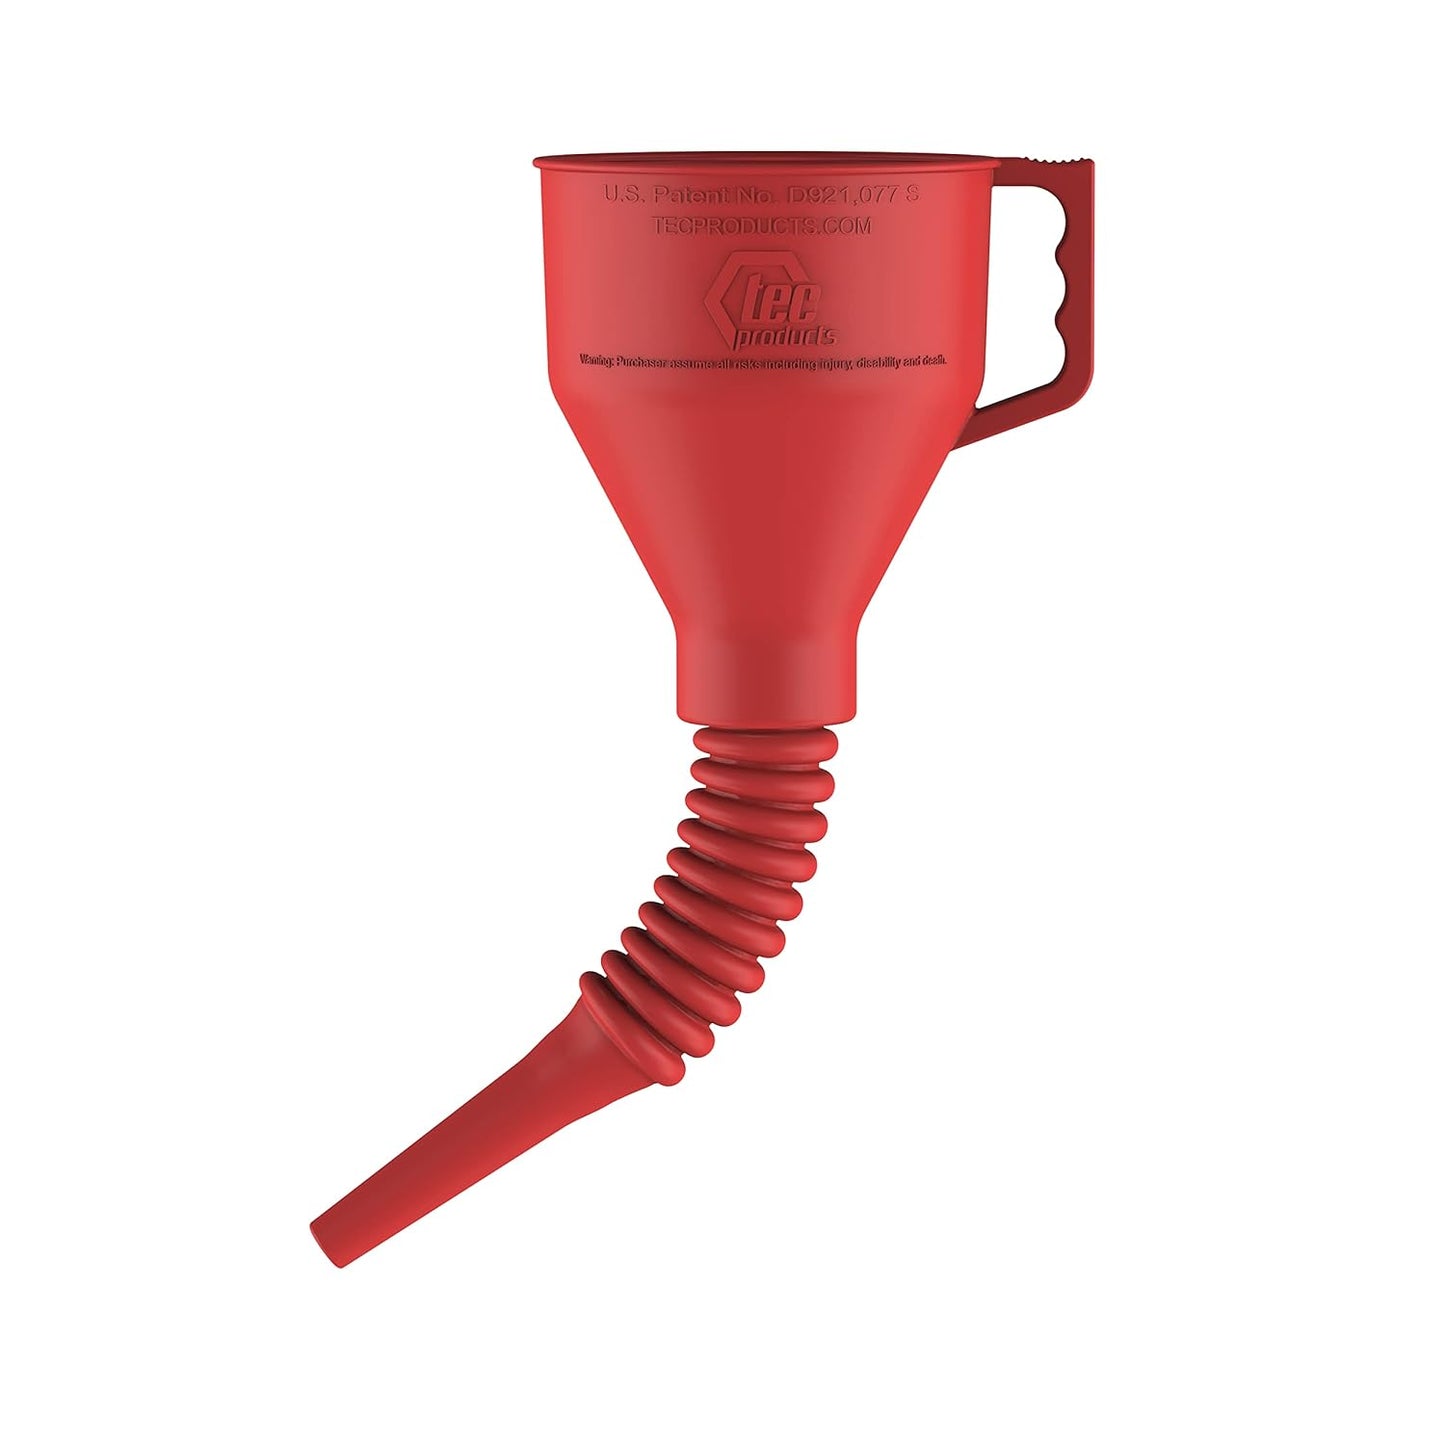 Flexall Funnel - Flexible Rubber Funnel with Handle, Multiple Sizes and Colors, Made in the USA